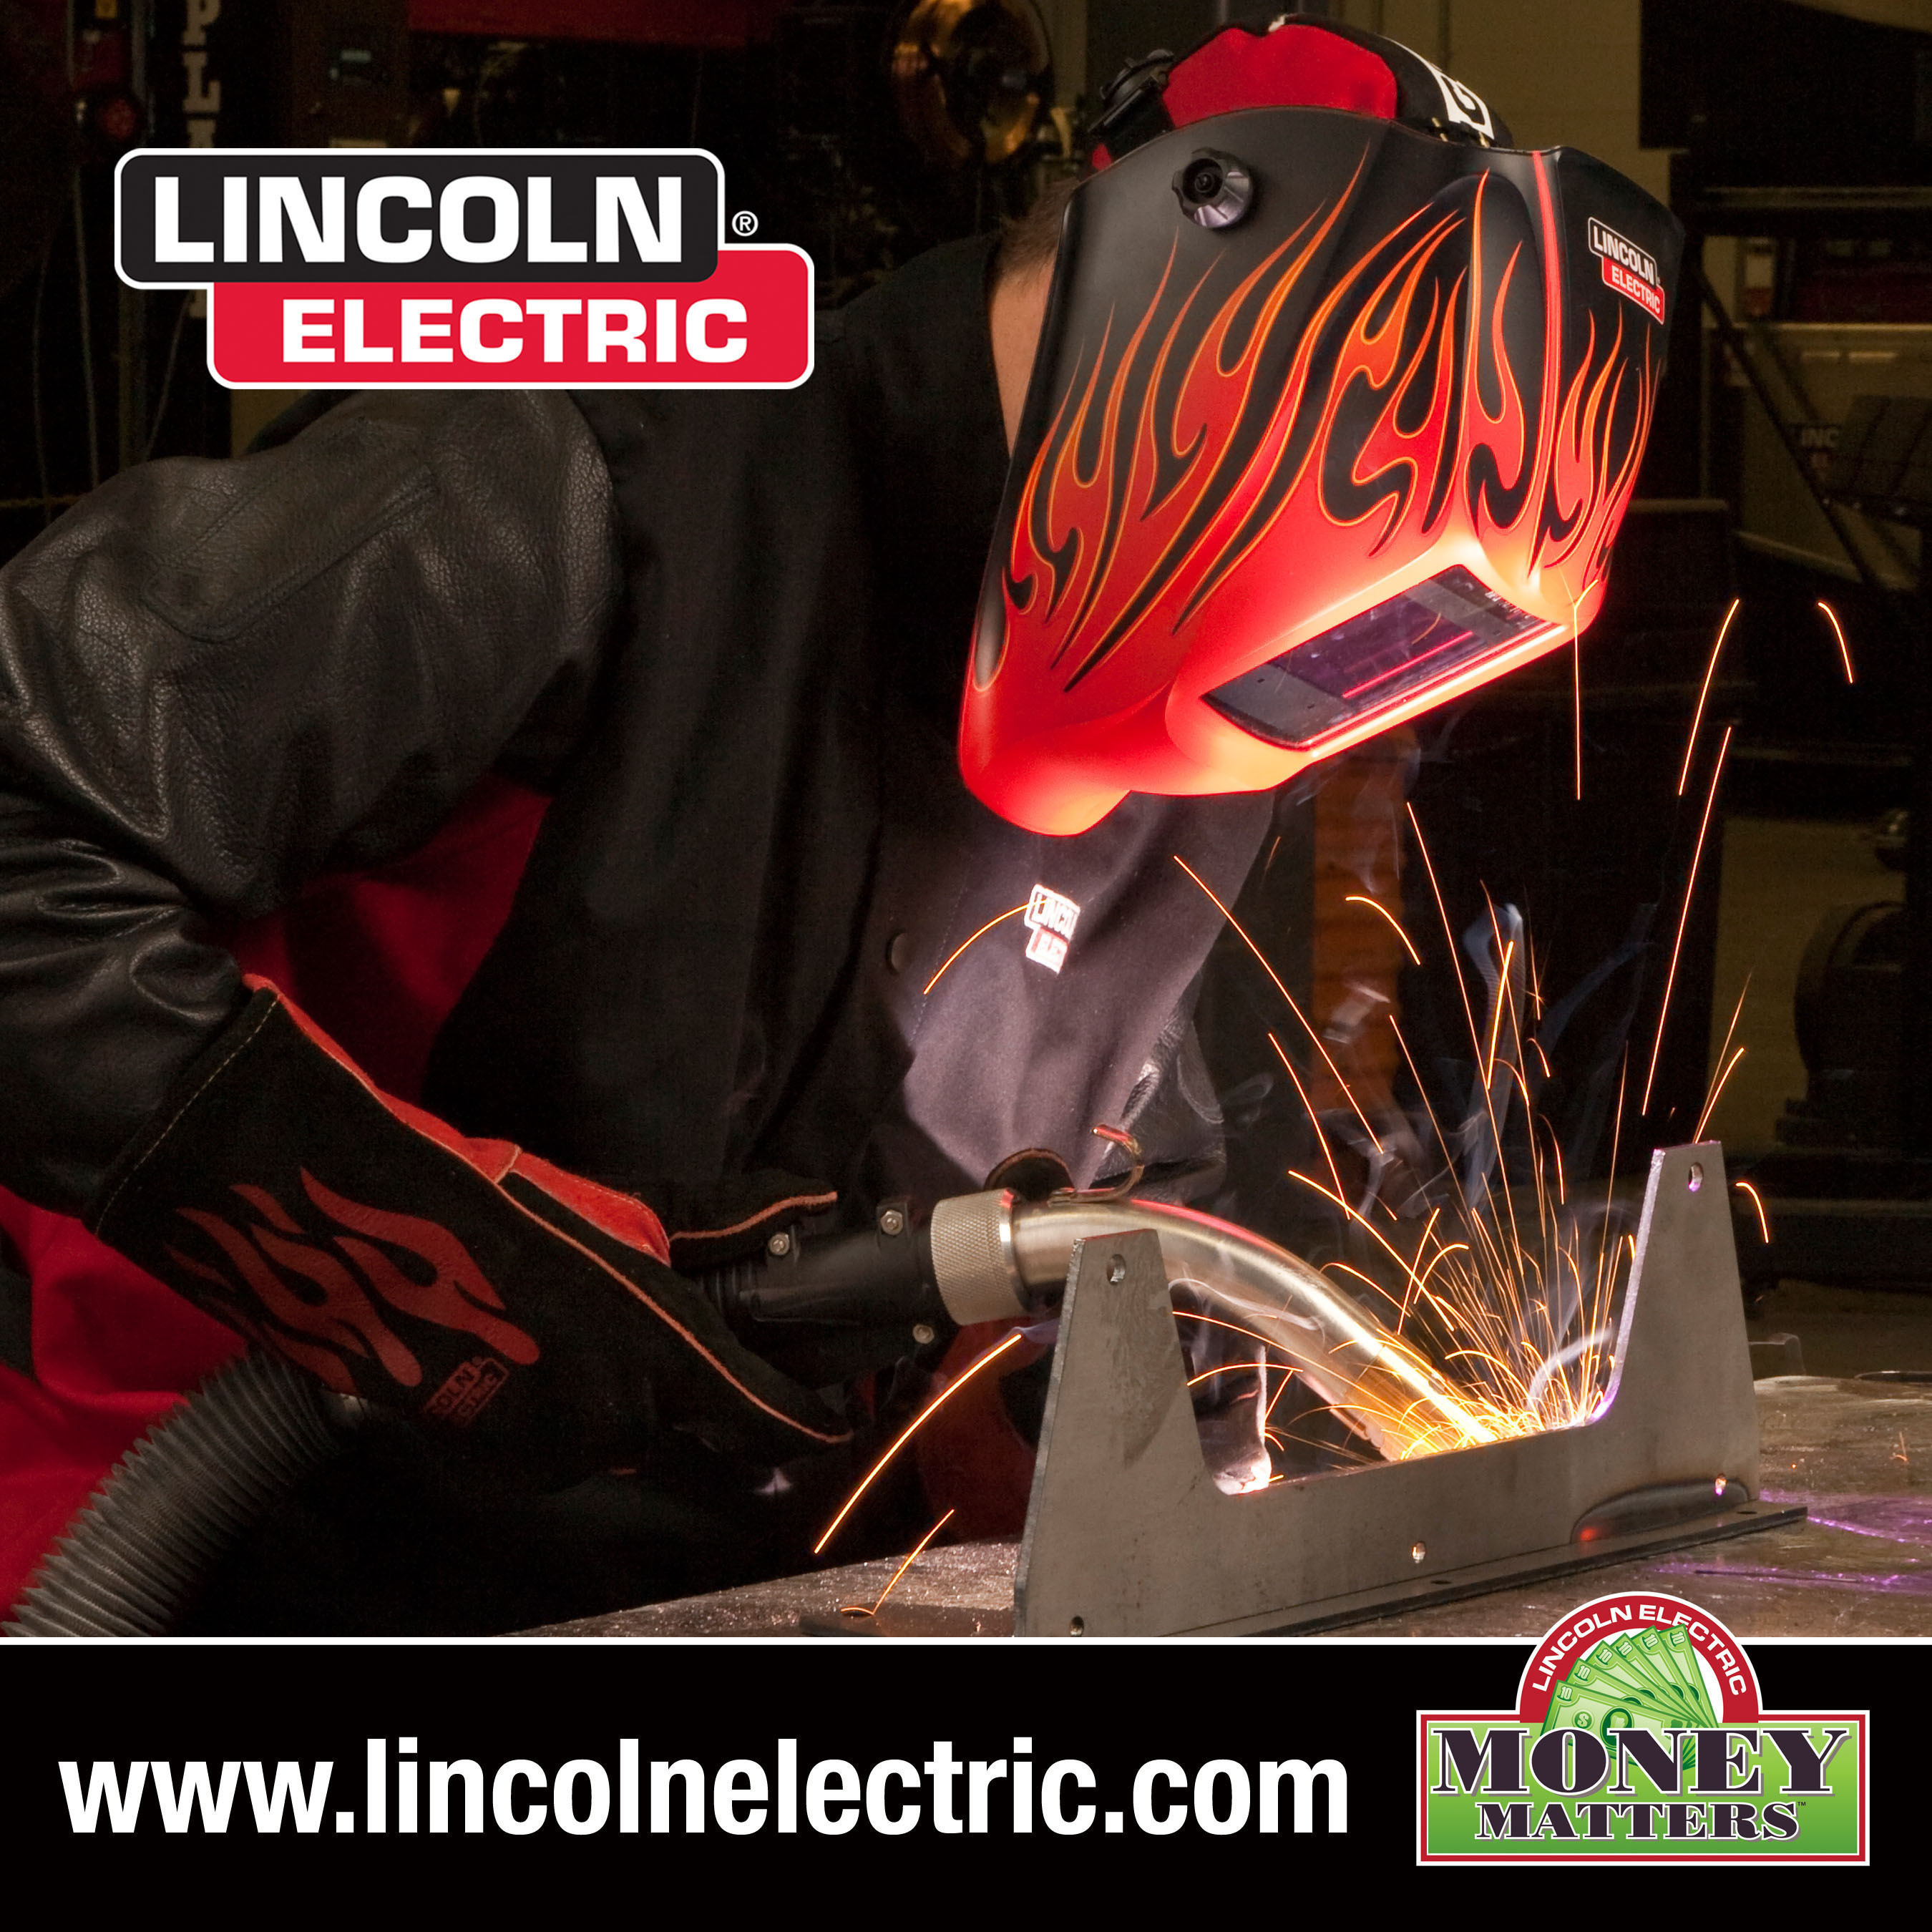 Lincoln Electric Gives Customers Their Choice Between A Cash Rebate Or 